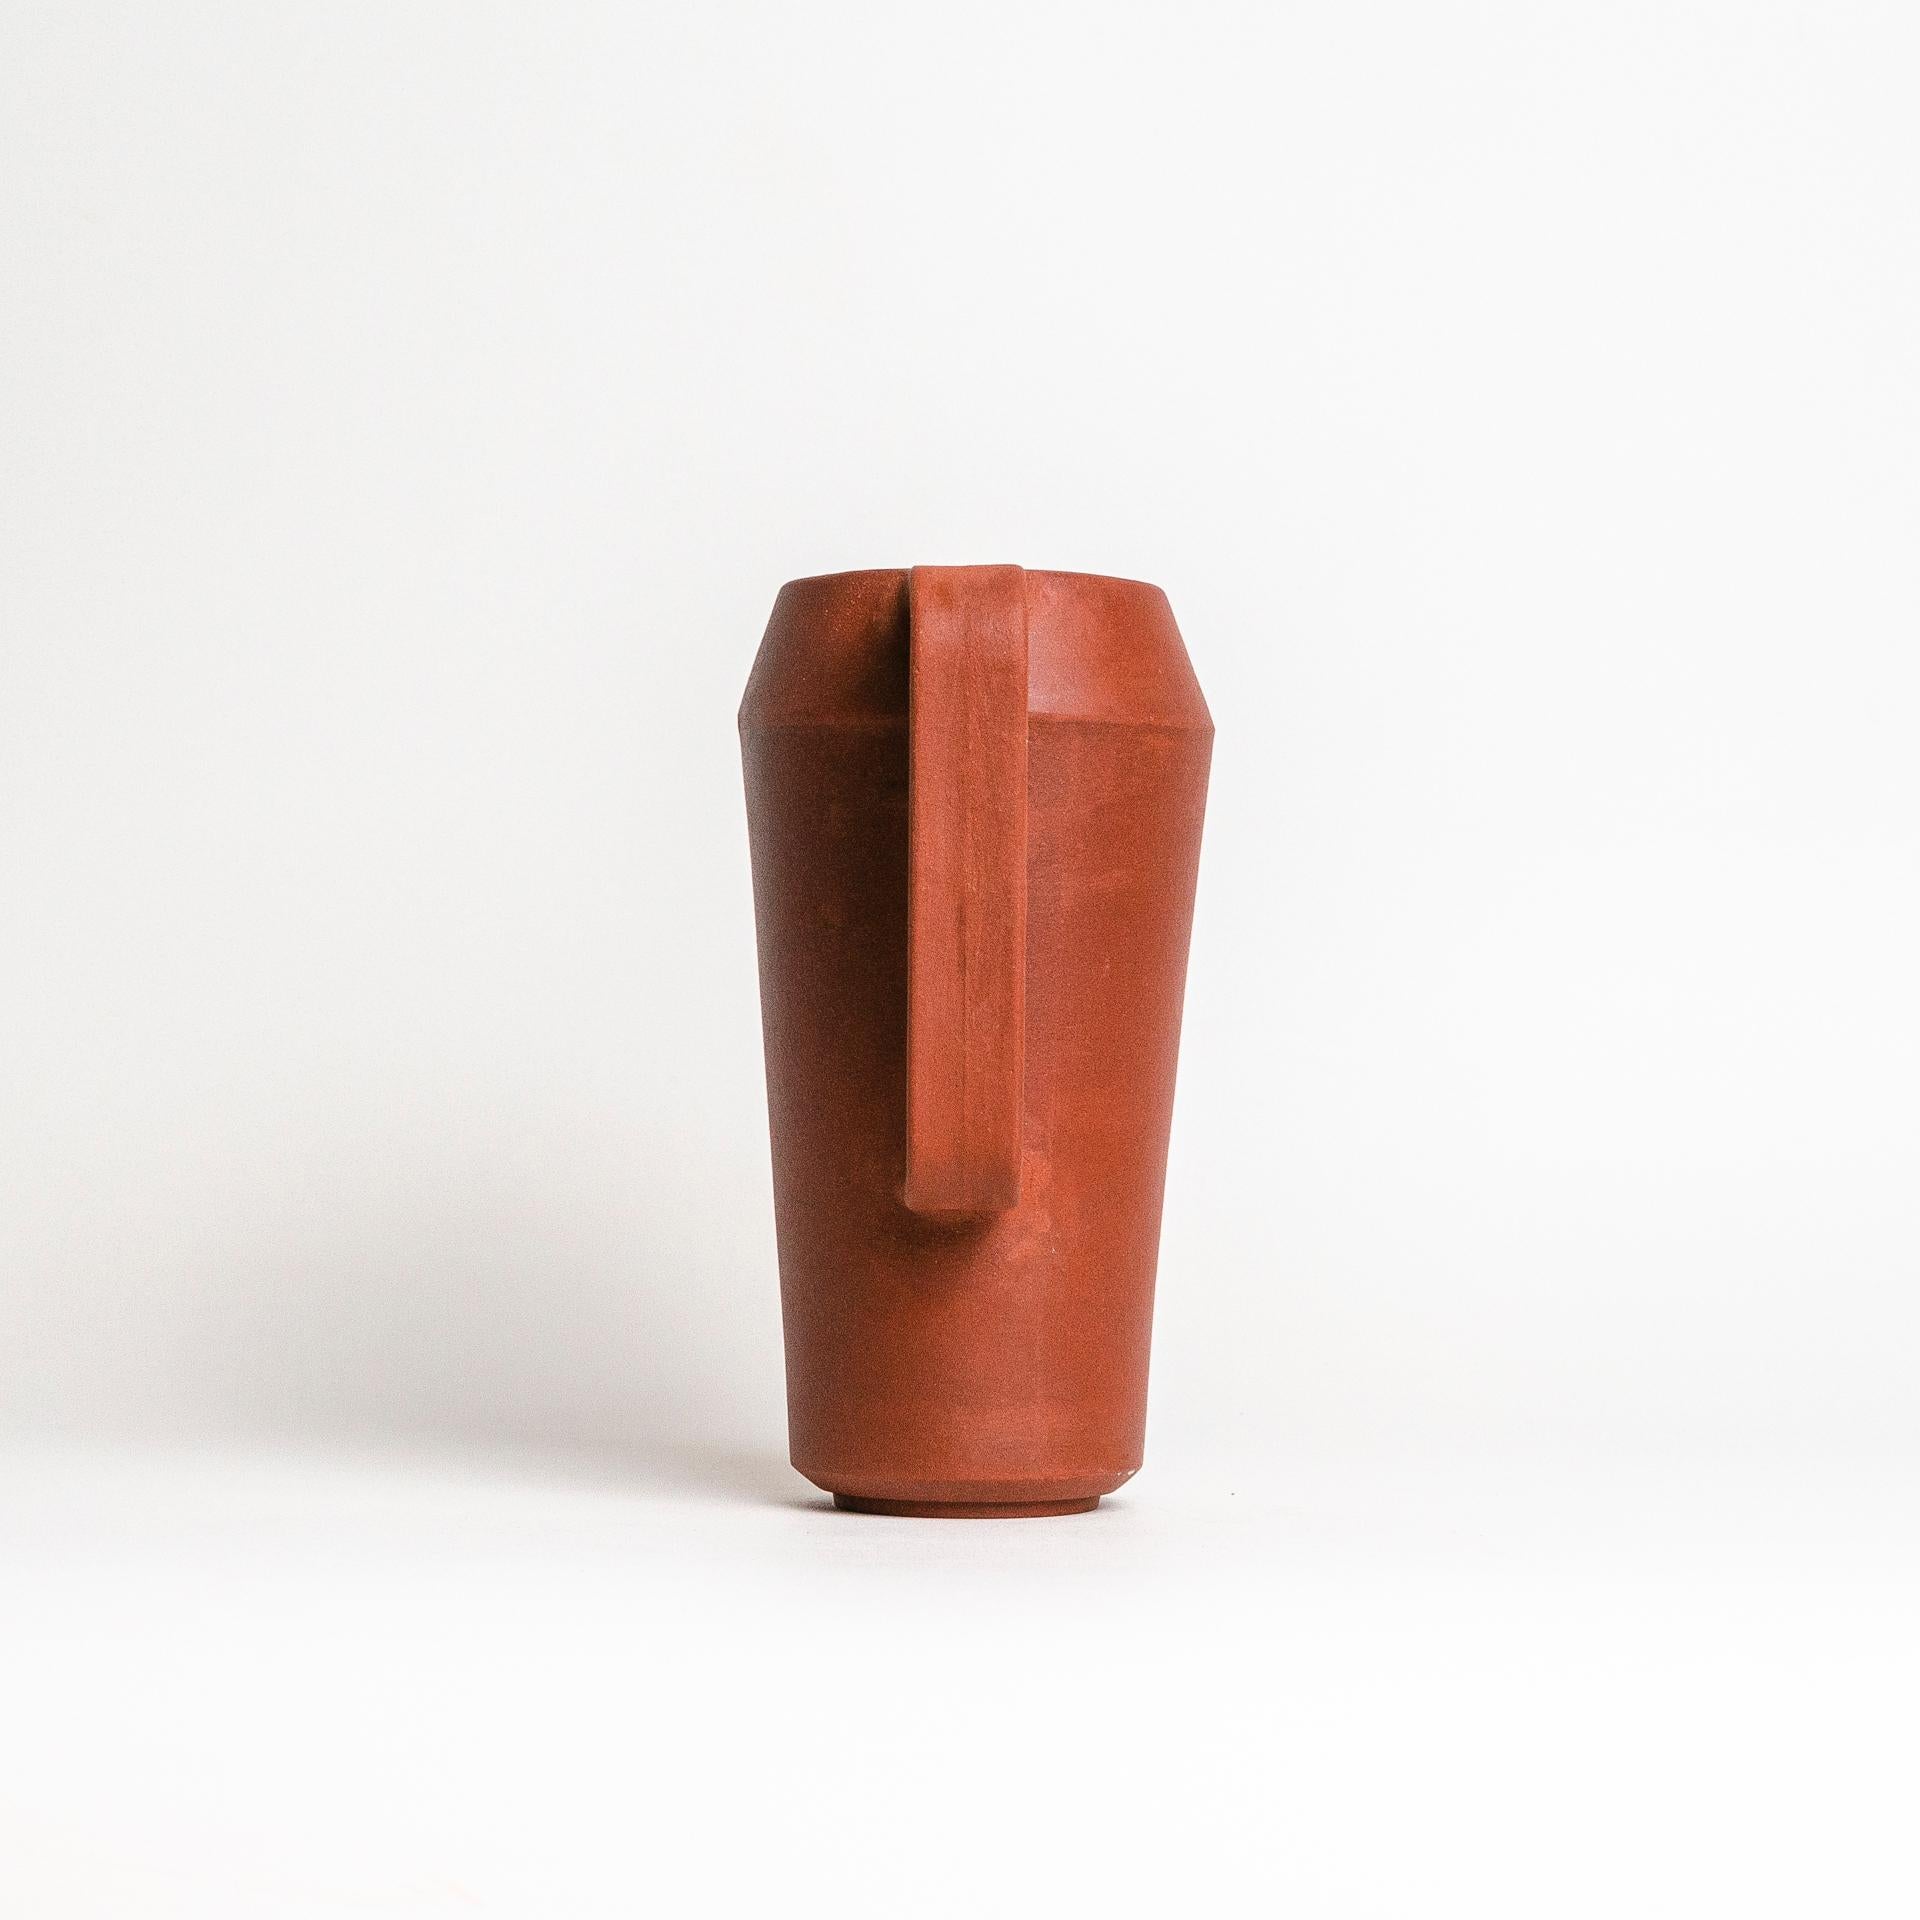 Brazilian Chanfro Terracotta Pitcher For Sale